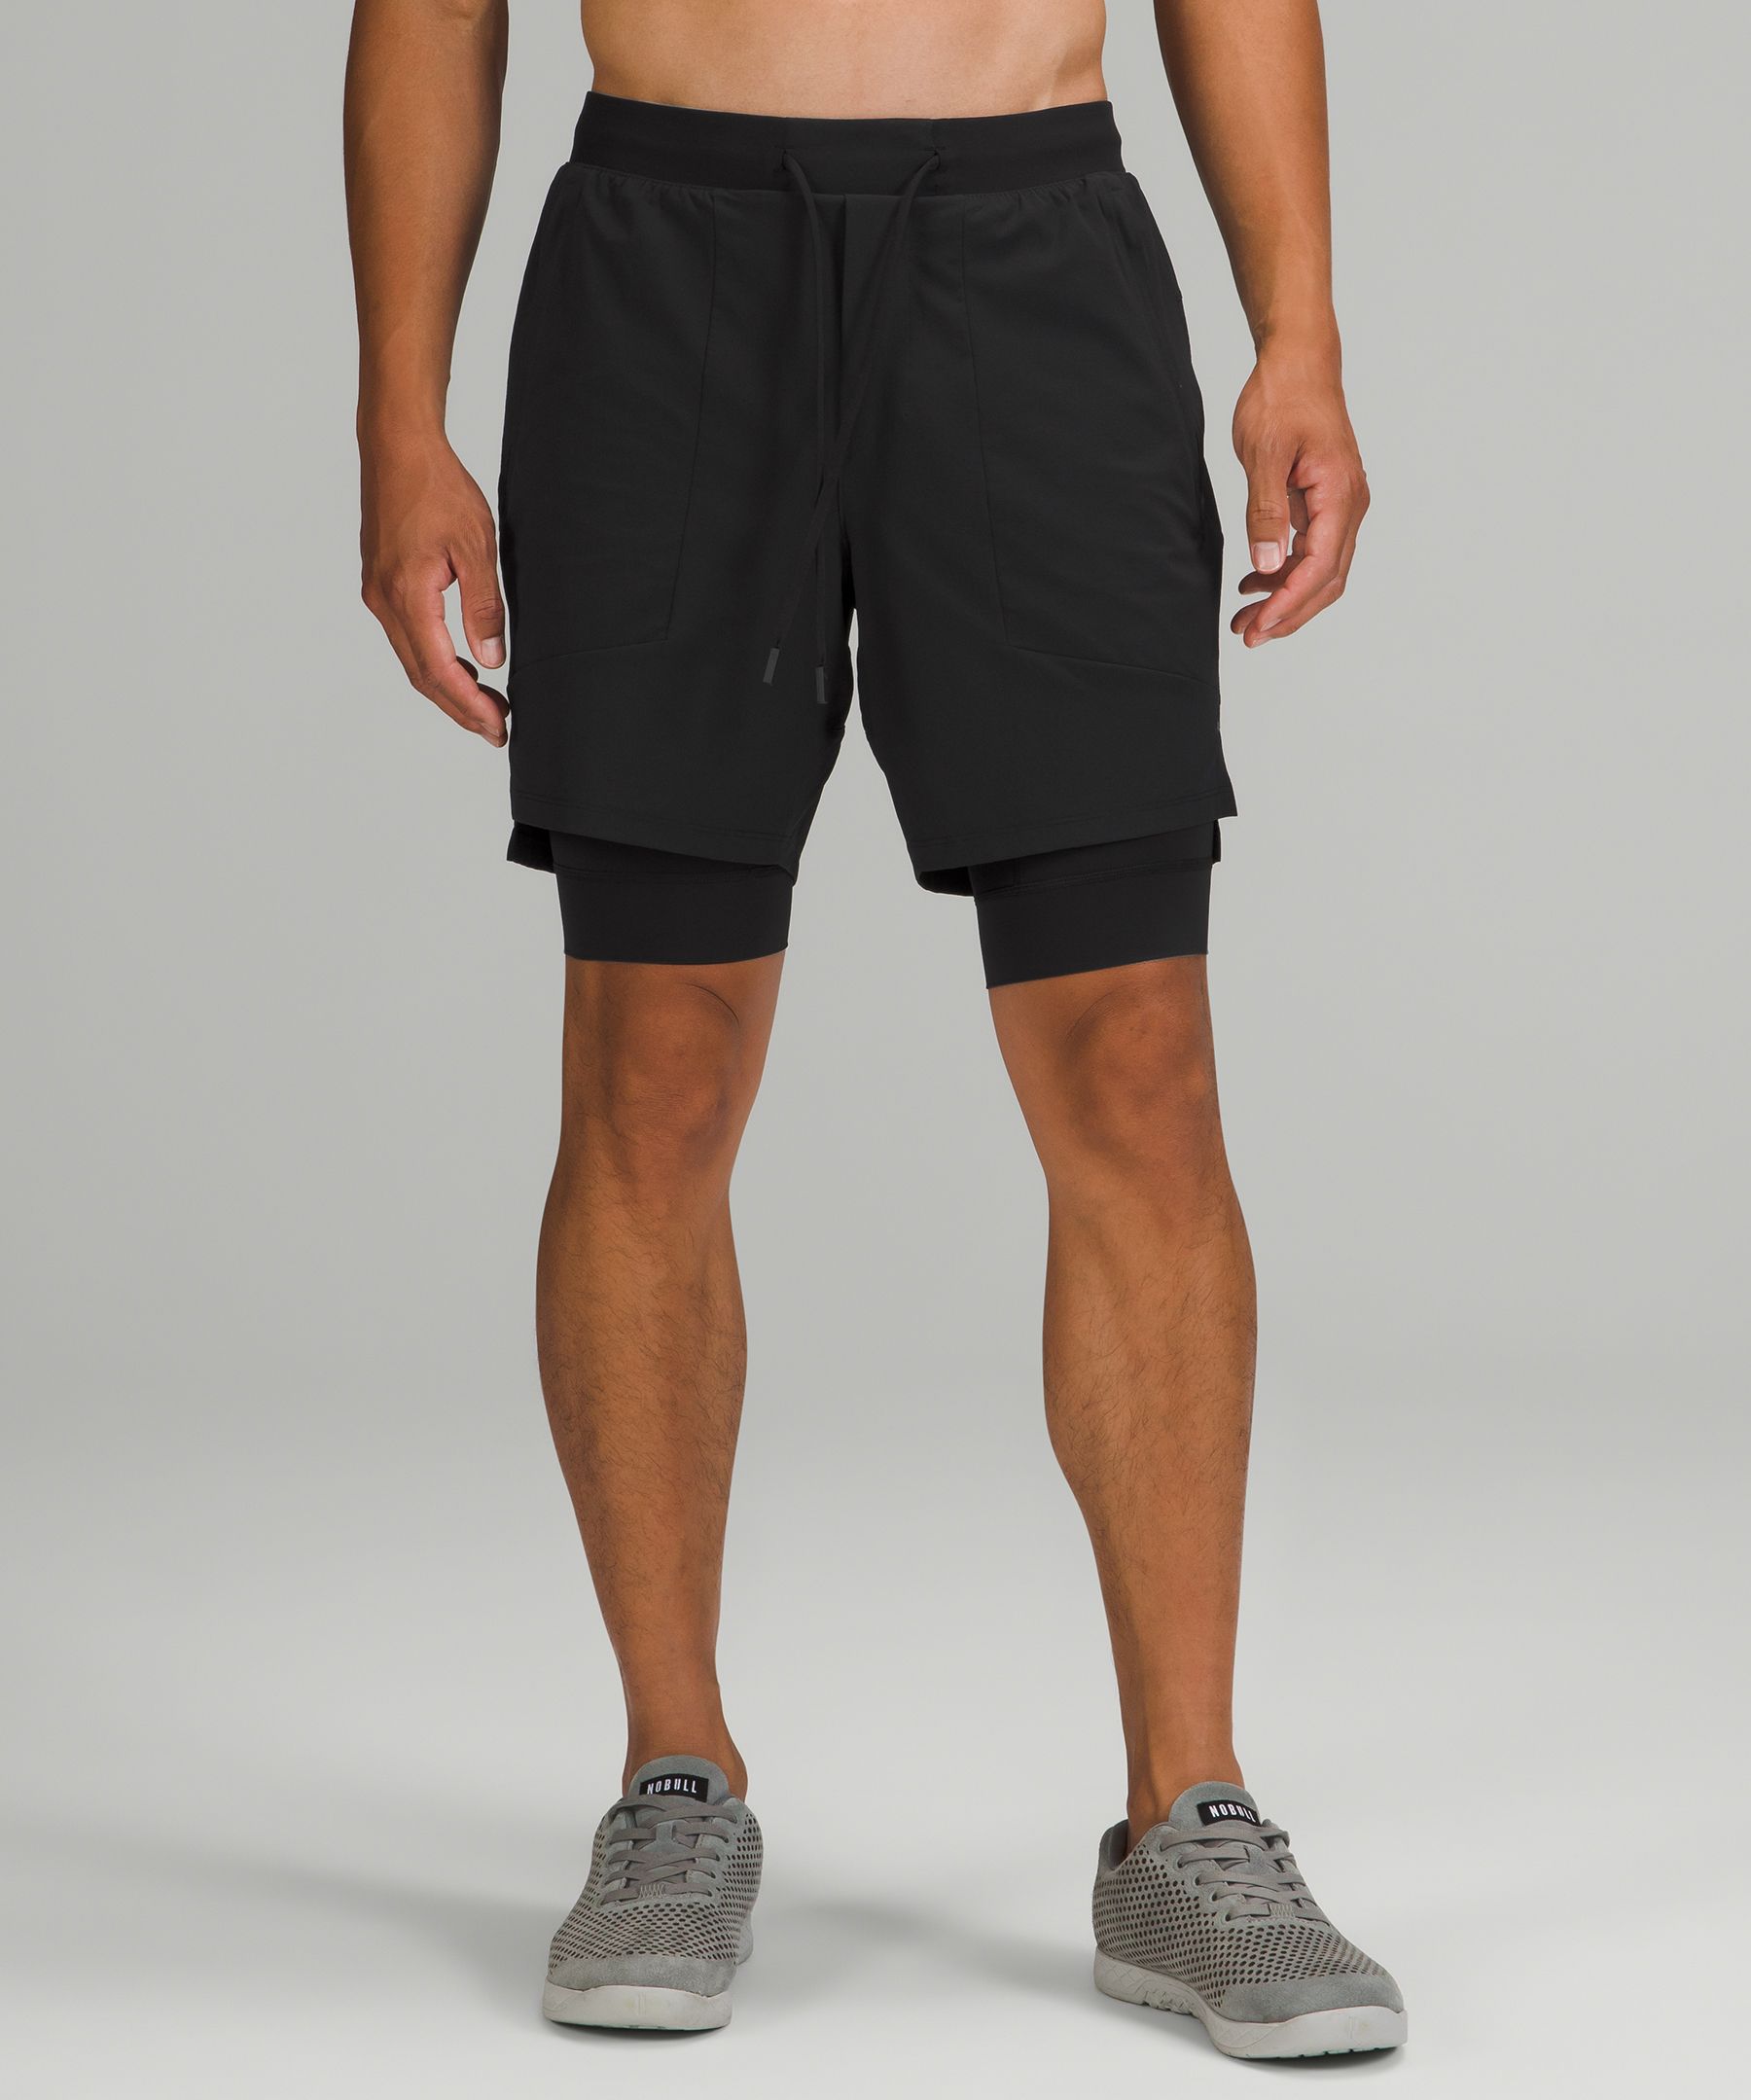 License to Train Lined Short 7, Men's Shorts